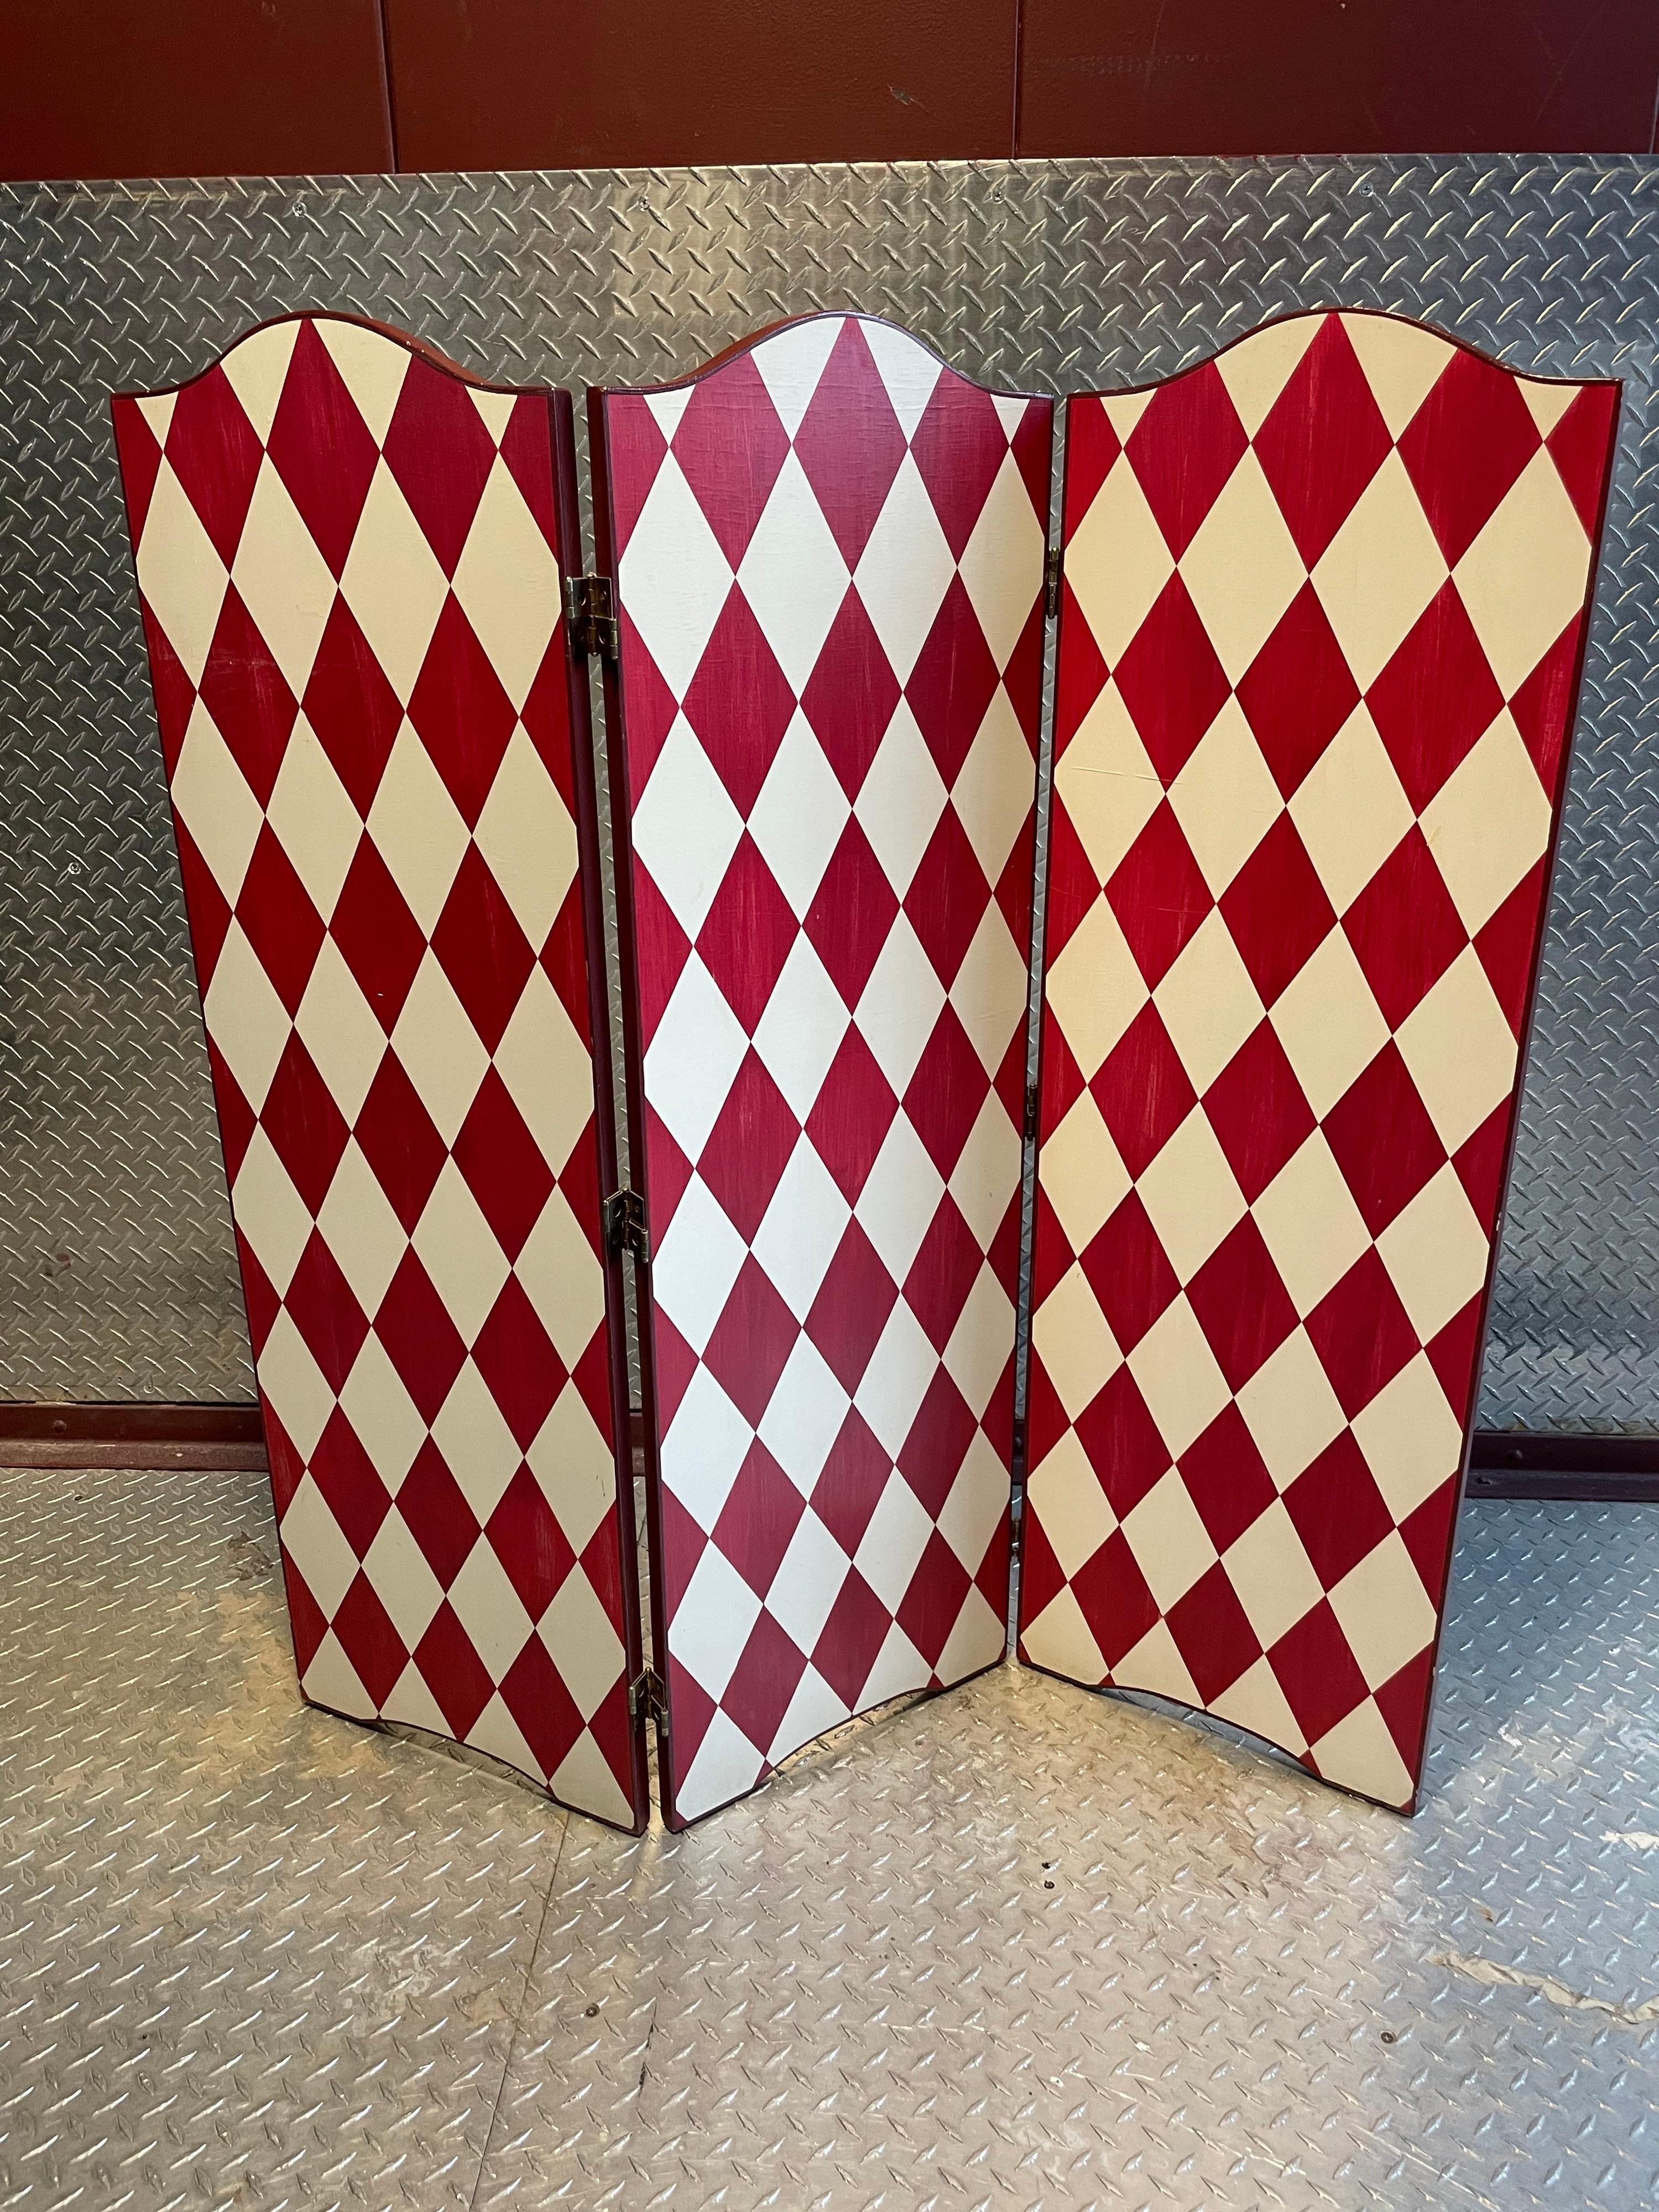 Artistic Hand Painted French Screen Divider in a Festive White and Deep Red For Sale 4